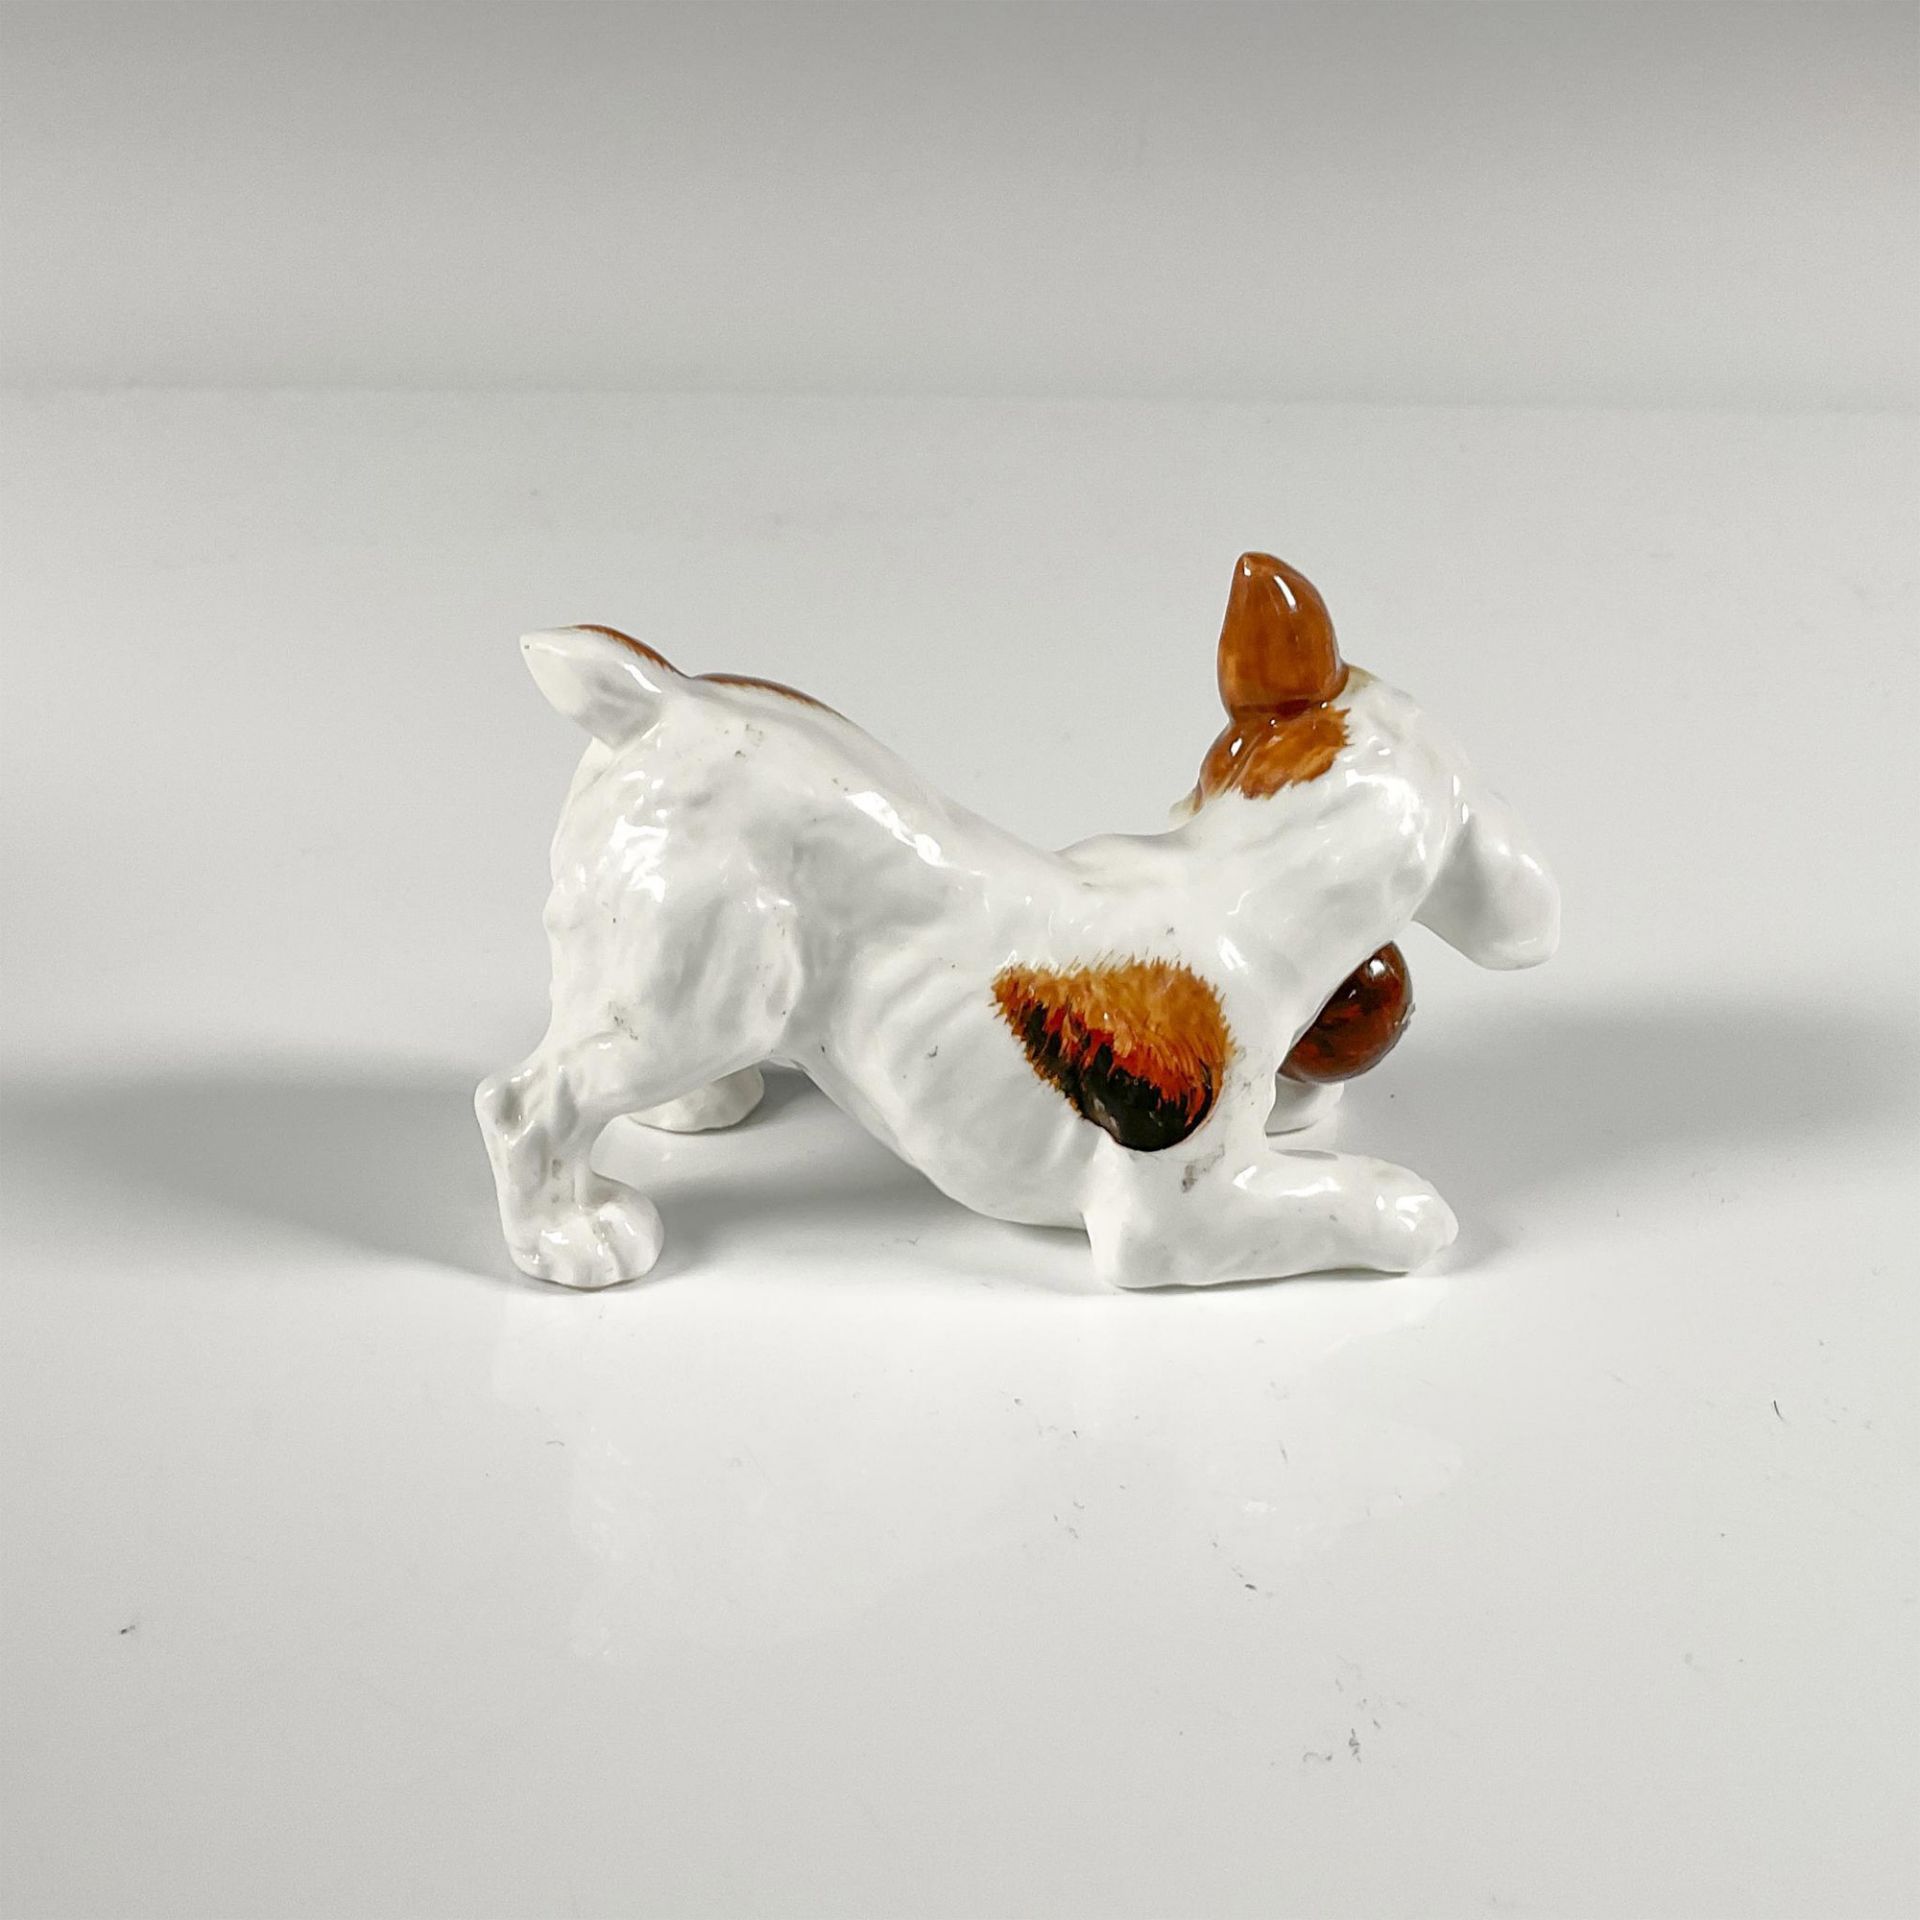 Jack Russell Puppy - HN1103 - Royal Doulton Animal Figurine - Image 2 of 3